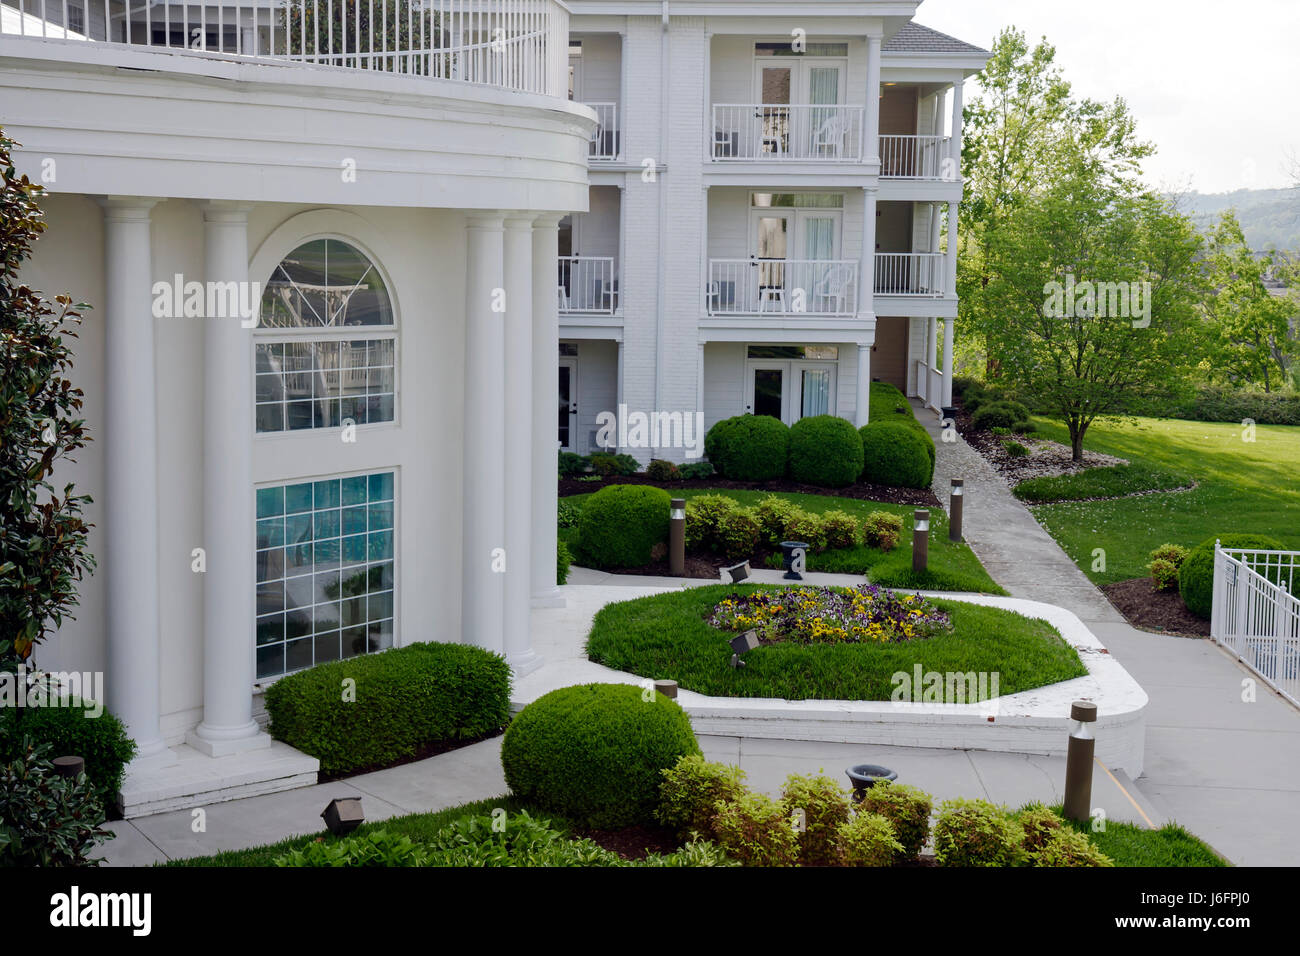 Sevierville Tennessee,Smoky Mountains,Clarion Inn,Willow River,hotel,chain,lodging,hospitality,building,outside exterior,front,entrance,Greek Revival, Stock Photo